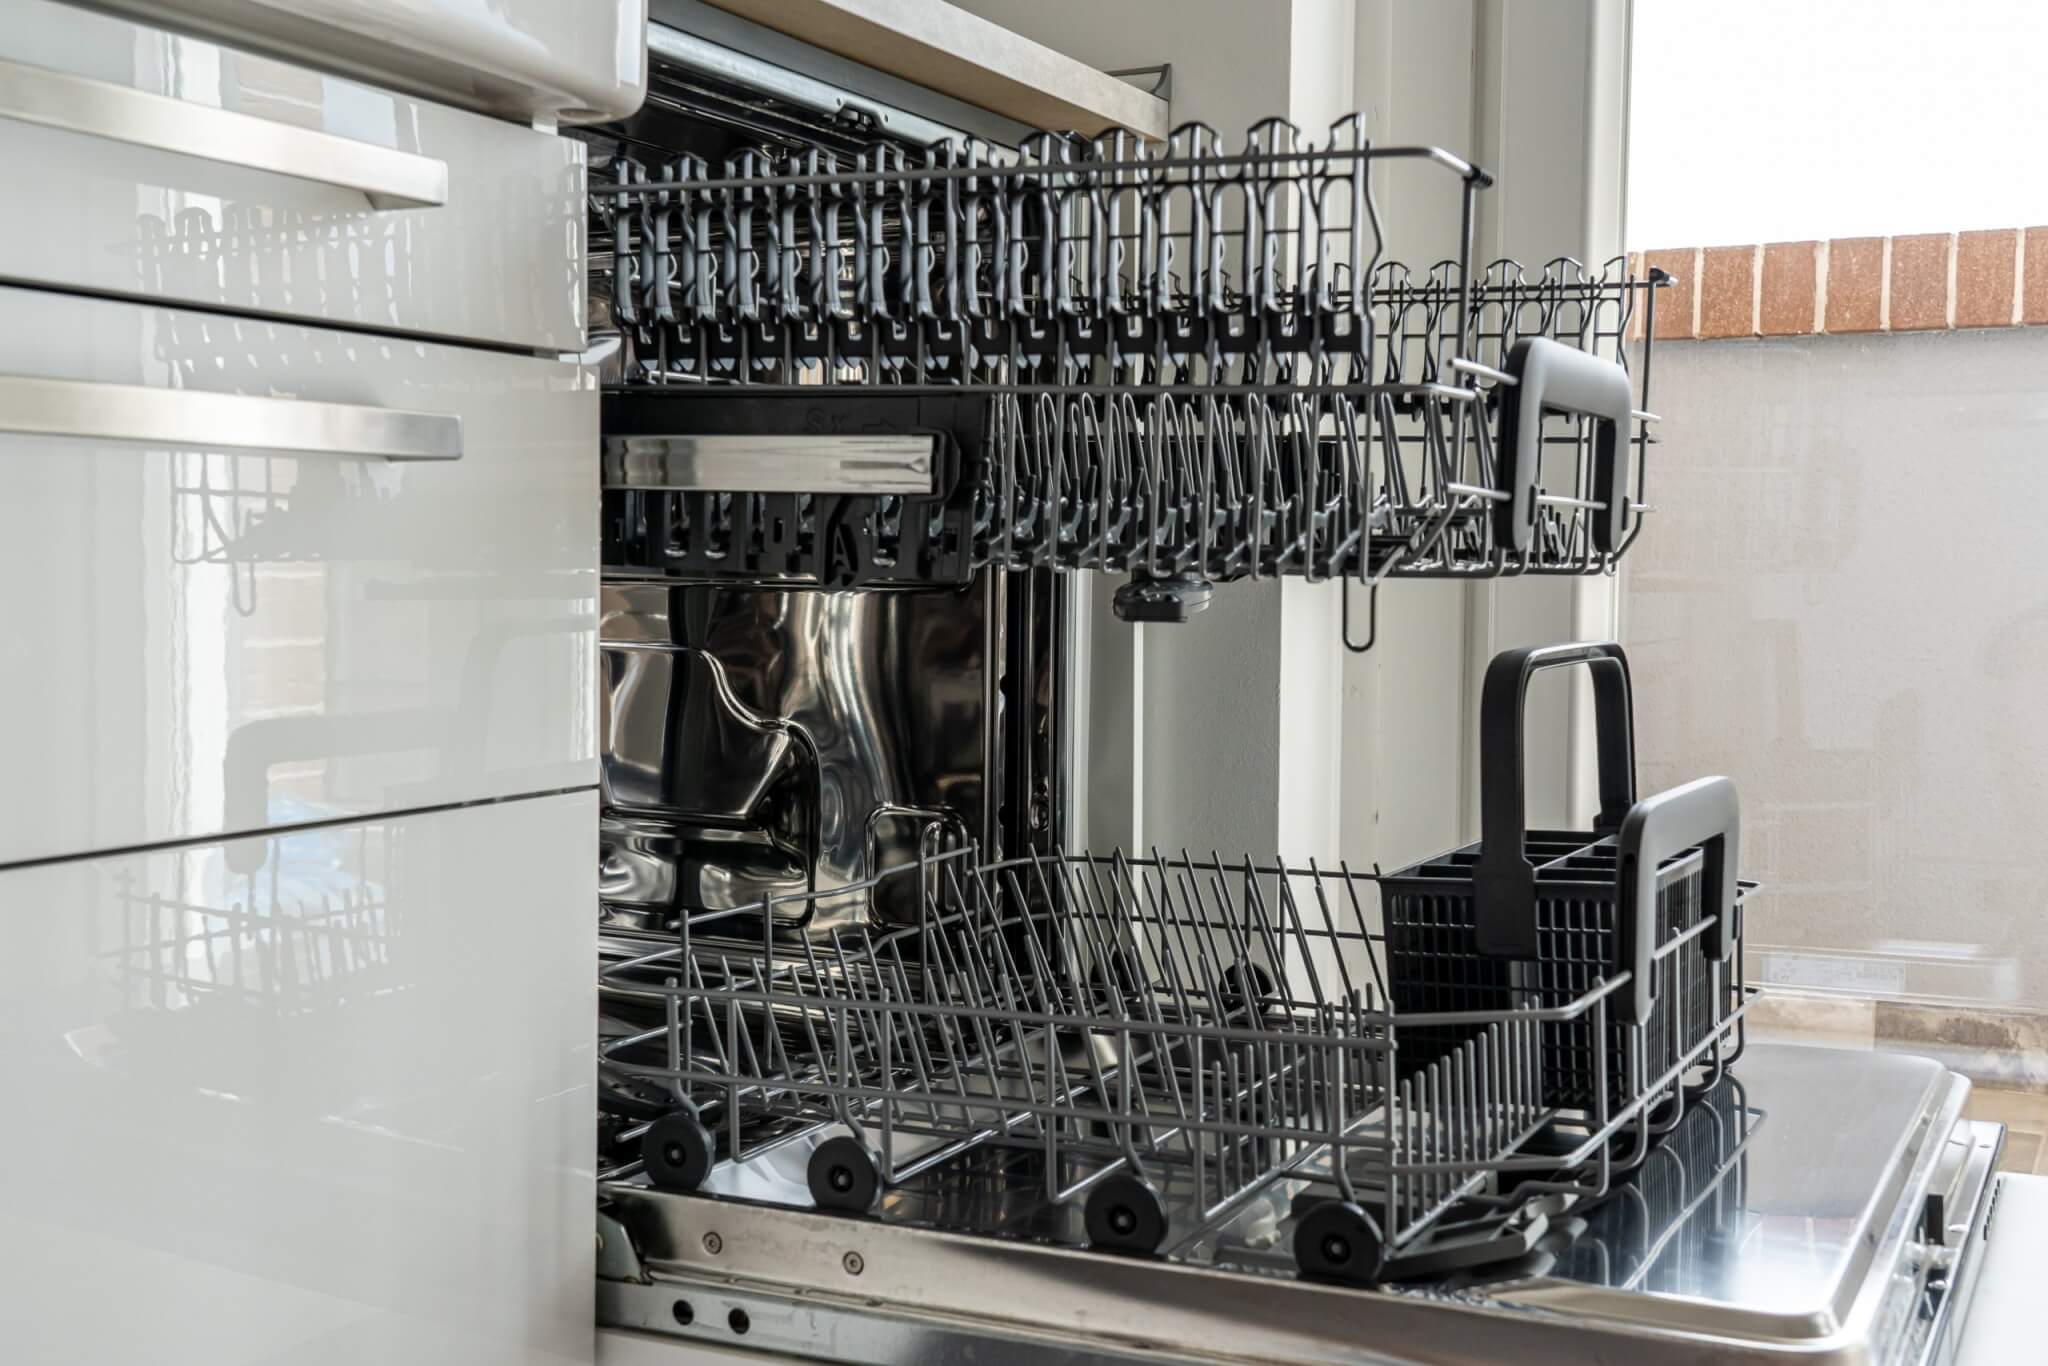 Sale 2023: Tired of cleaning dishes? Get up to 59% off on dishwashers